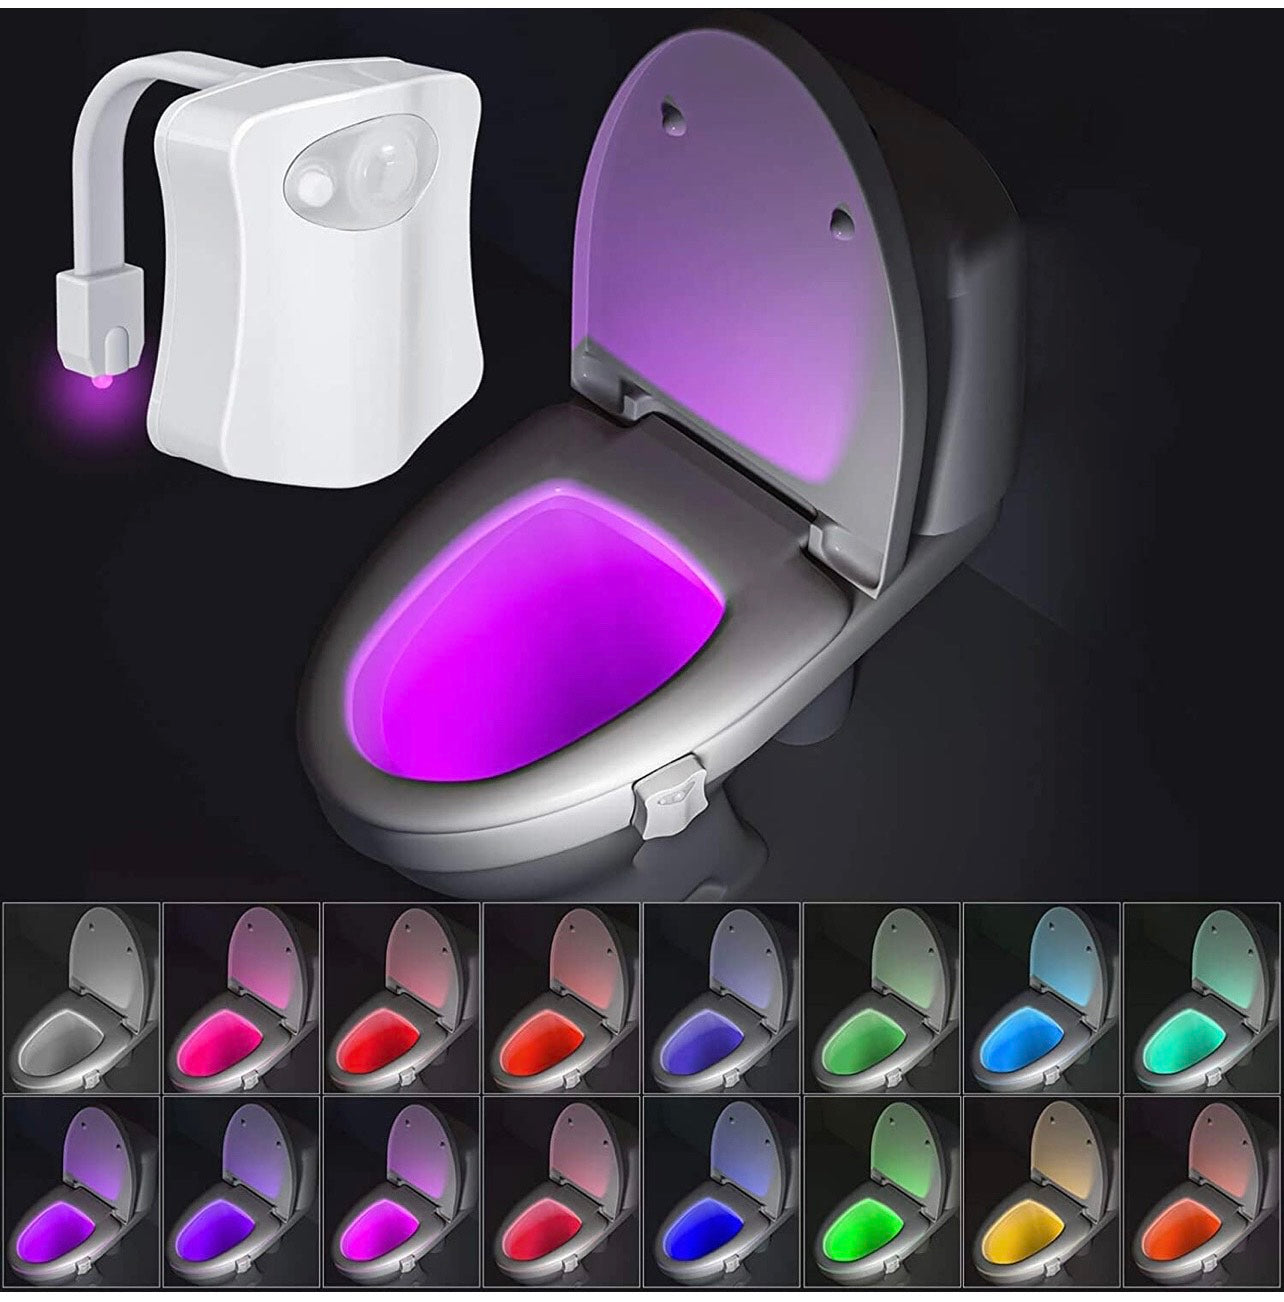 MIEFL Toilet Light Motion Sensor Activated 16 Colors Changing, 3 Pack LED  Toilet Seat Lights Inside Glow Bowl, Smart Disco Potty Night Light for